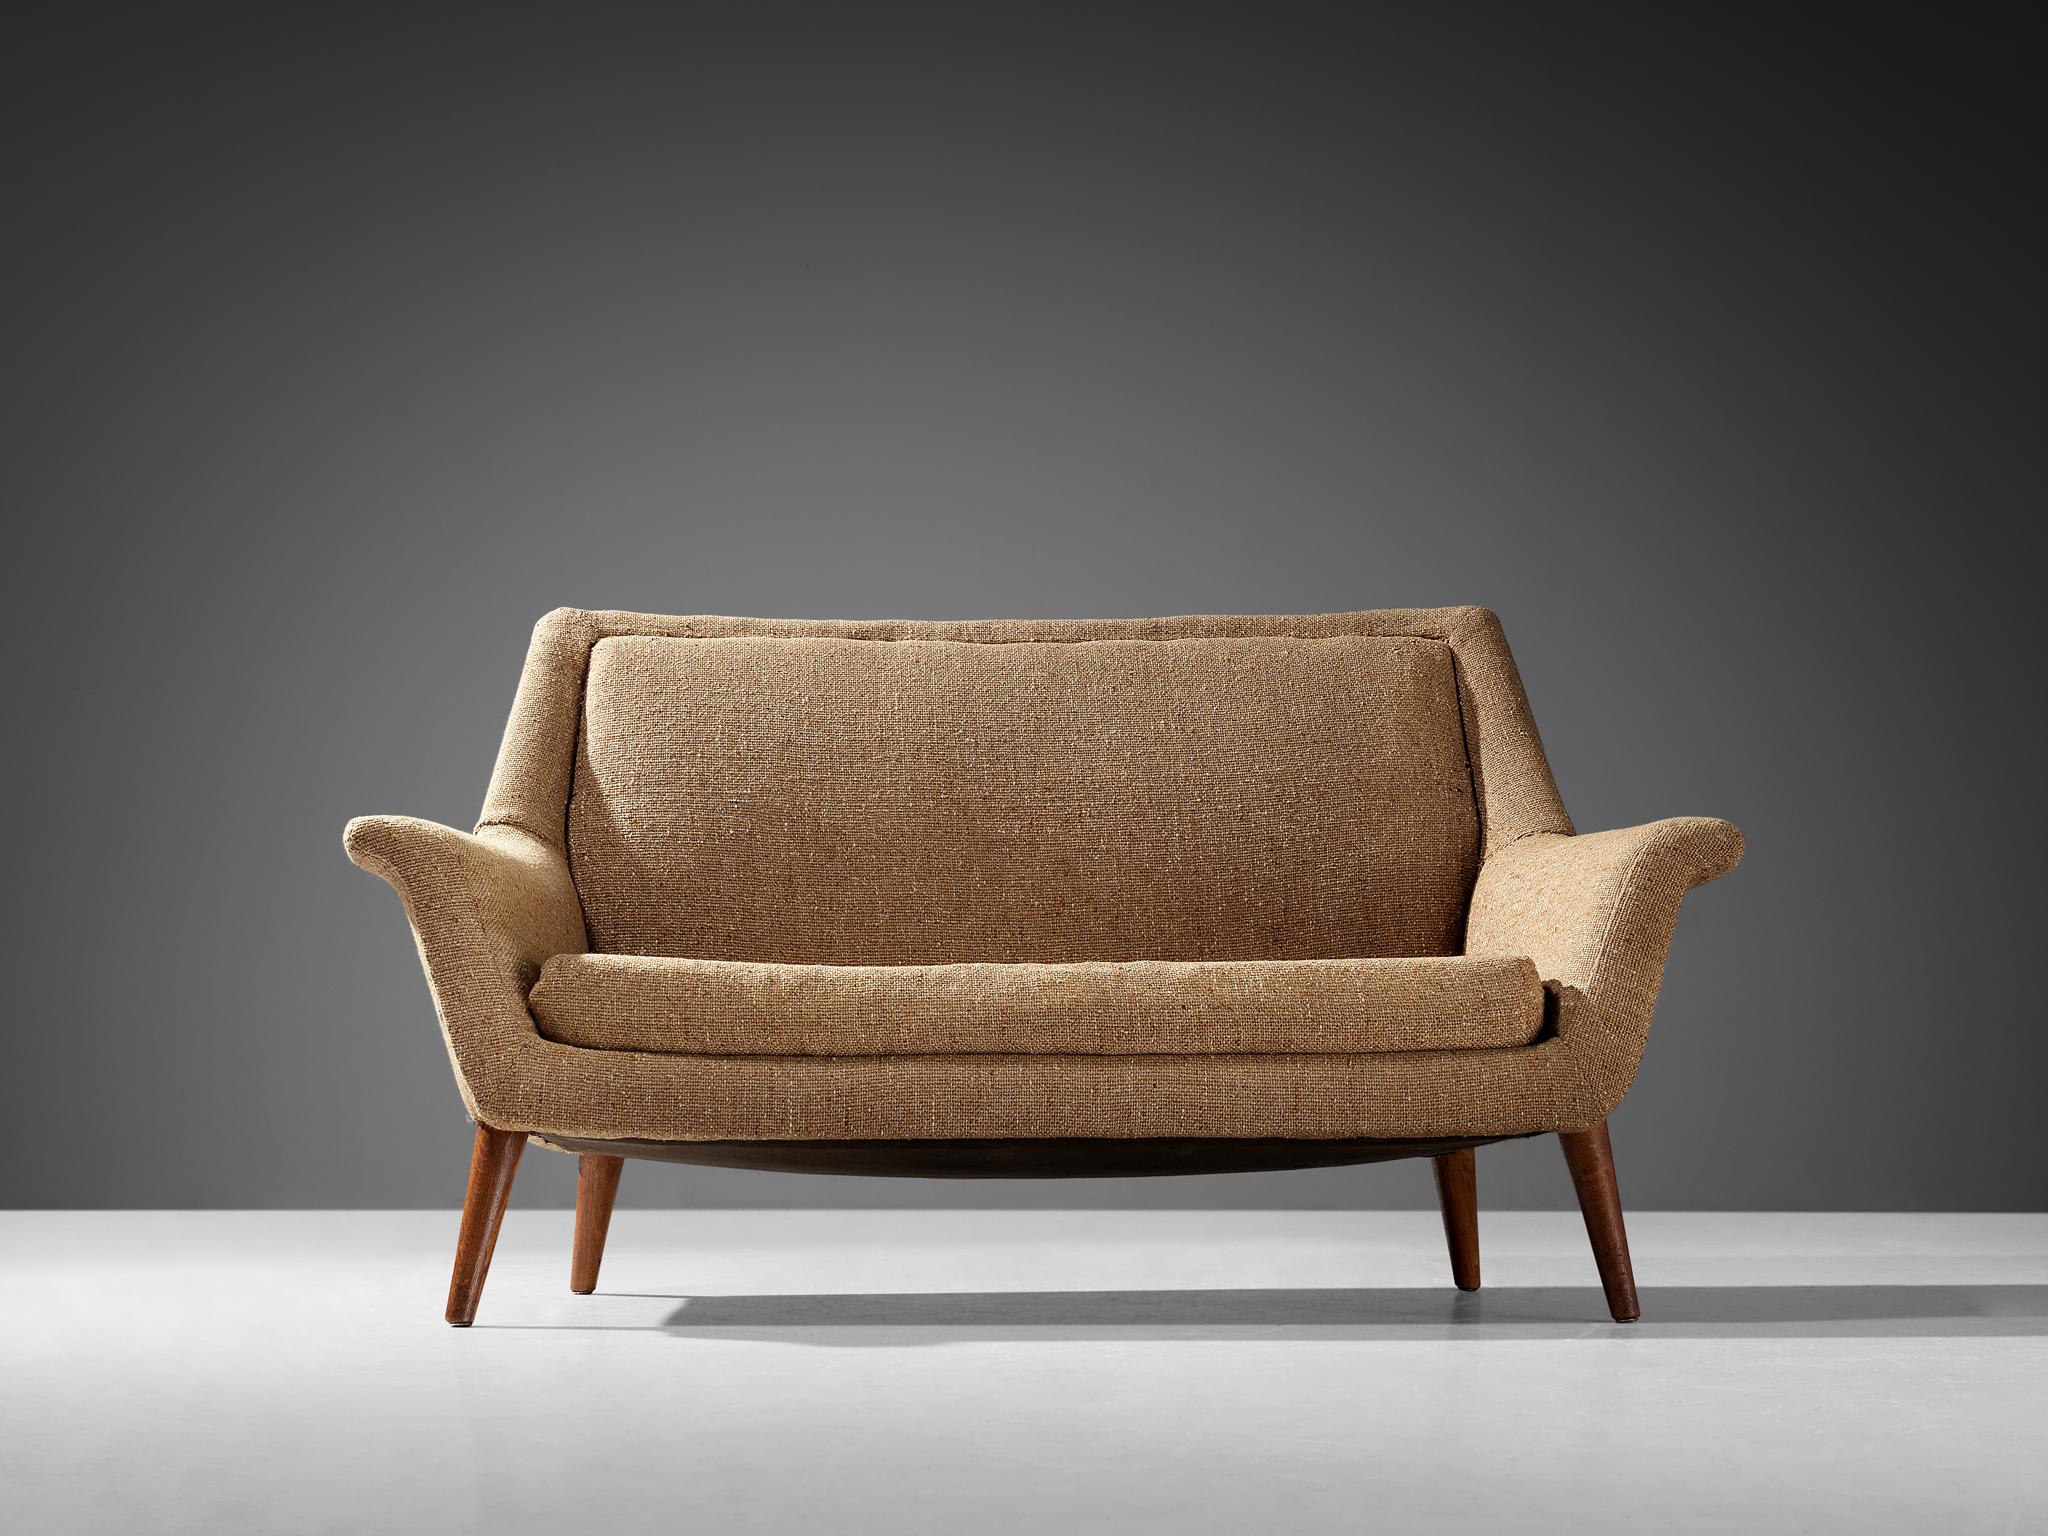 Mid-20th Century English Mid-Century Modern Sofa in Beige Wool and Teak  For Sale